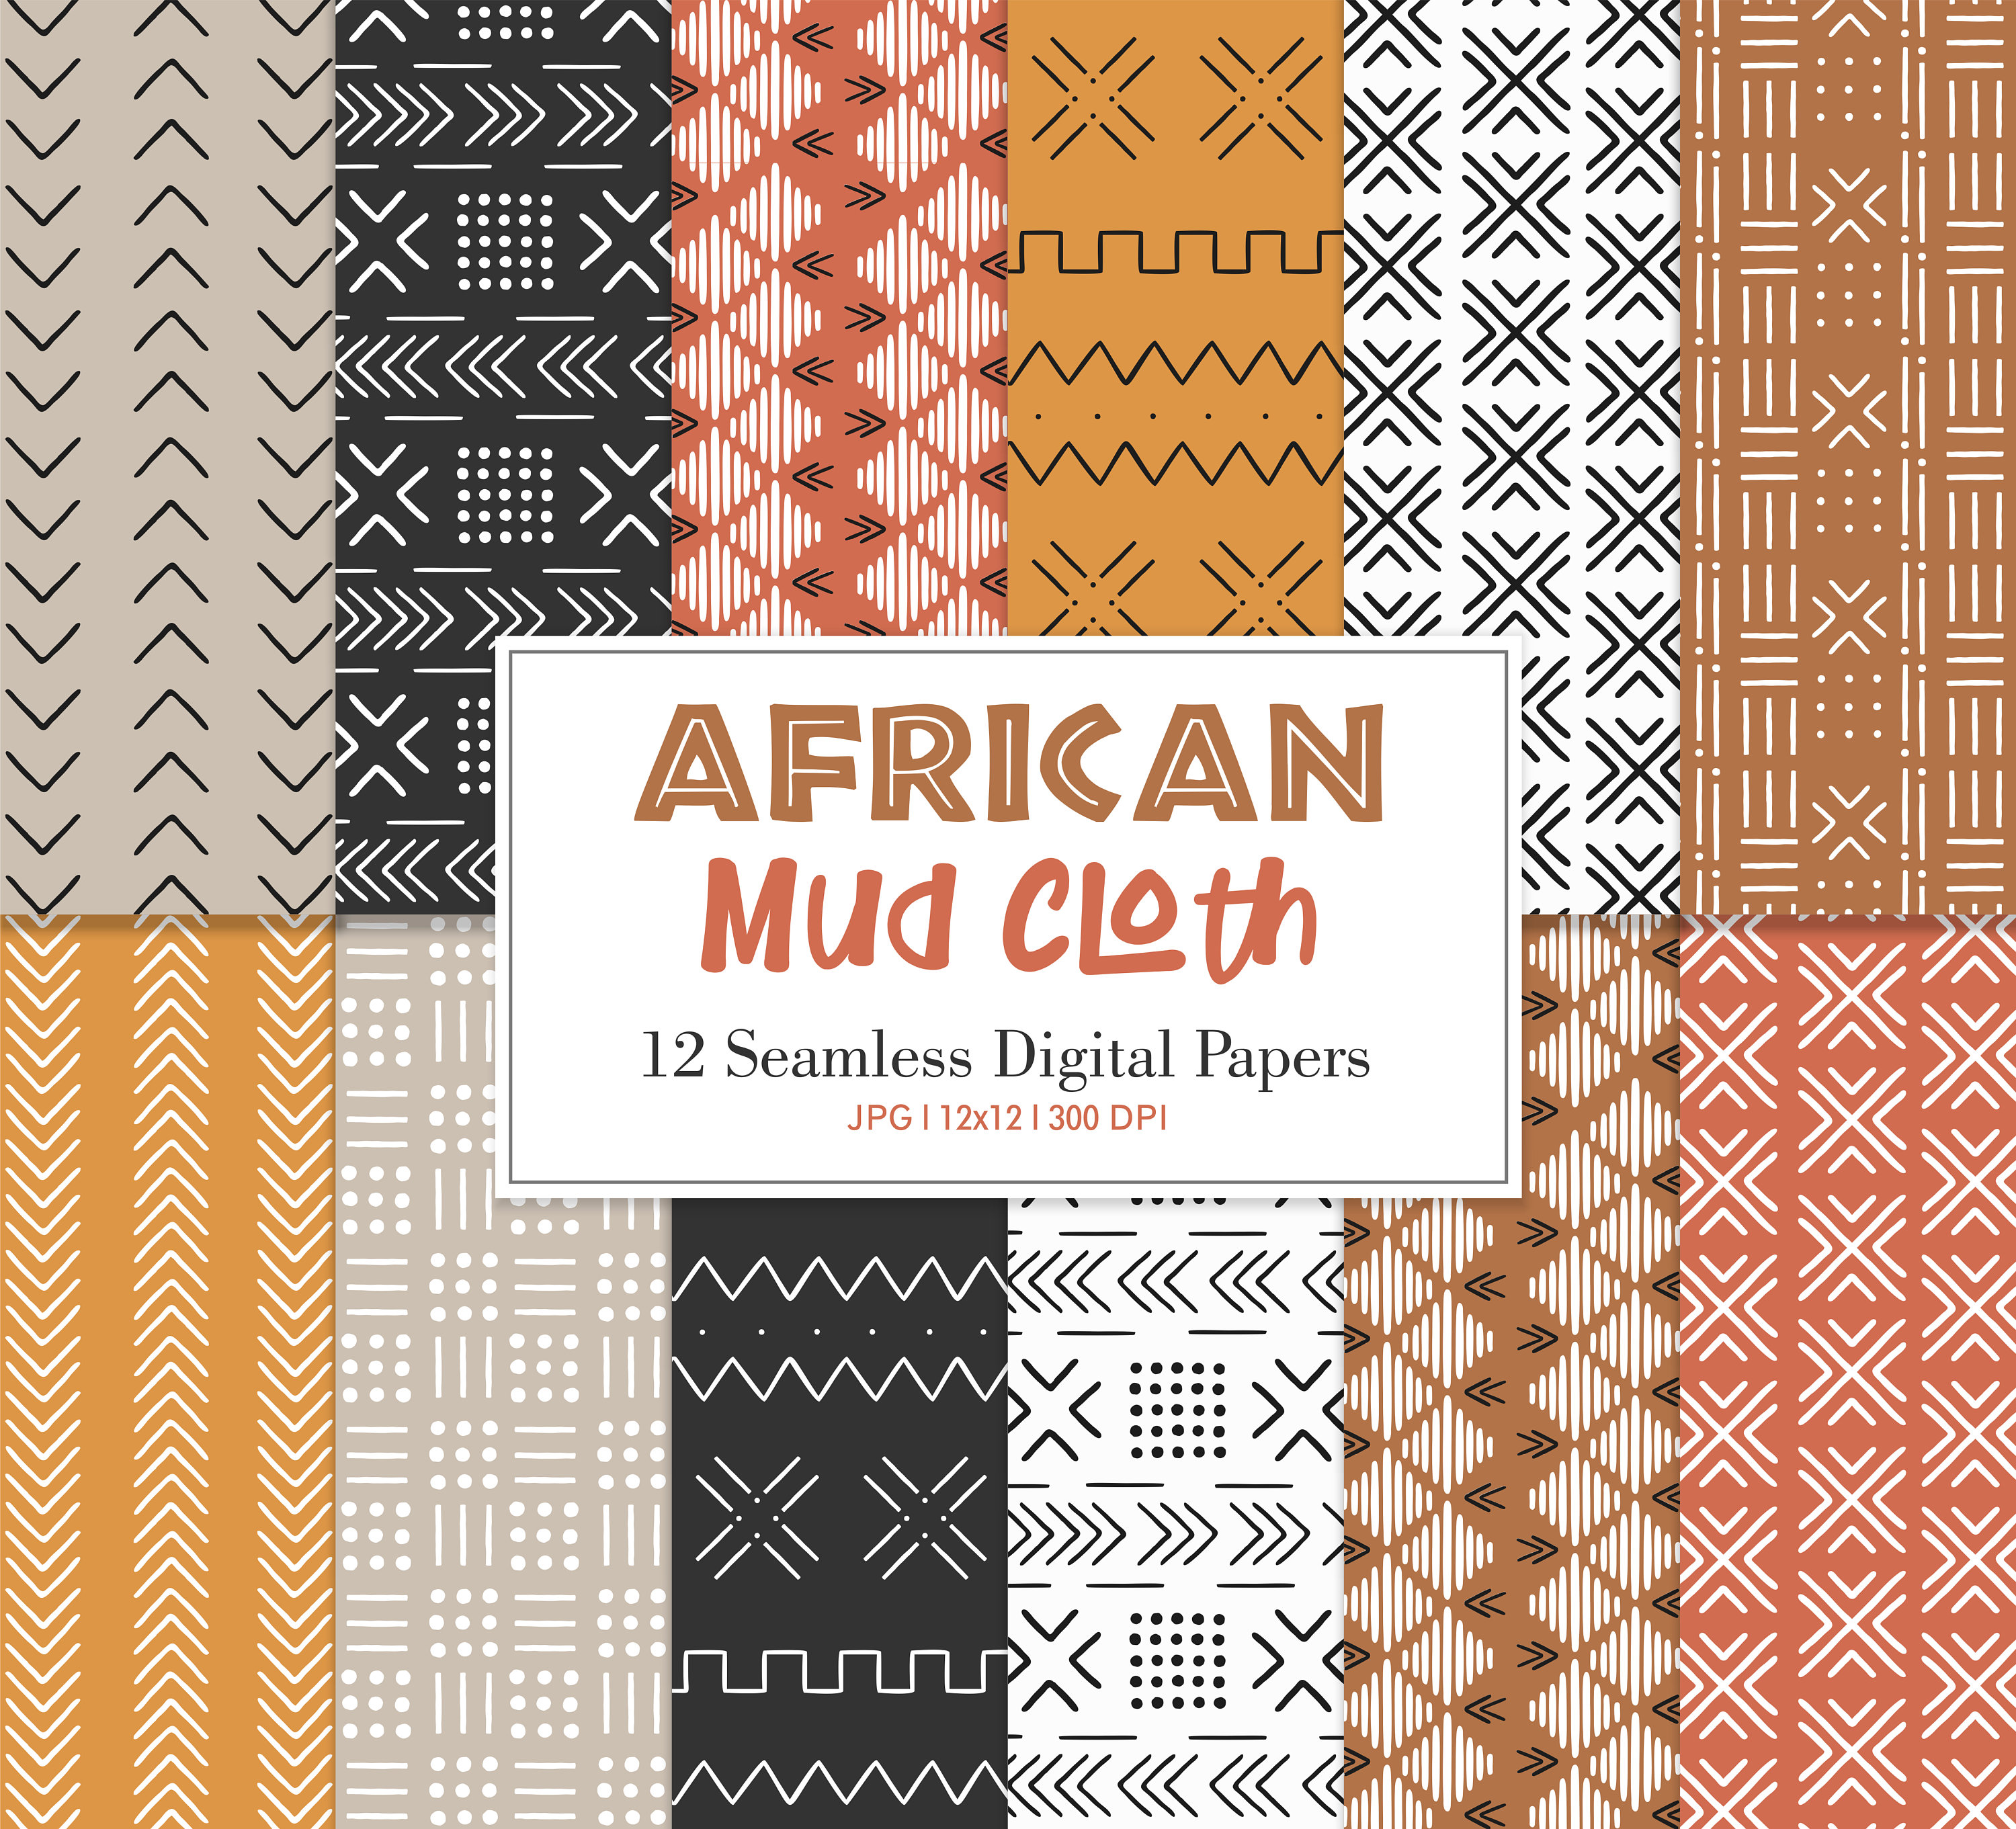 AFRICAN MUD CLOTH, African Mud Cloth Seamless Repeat Pattern, Backgrounds,  Printable Digital Paper 